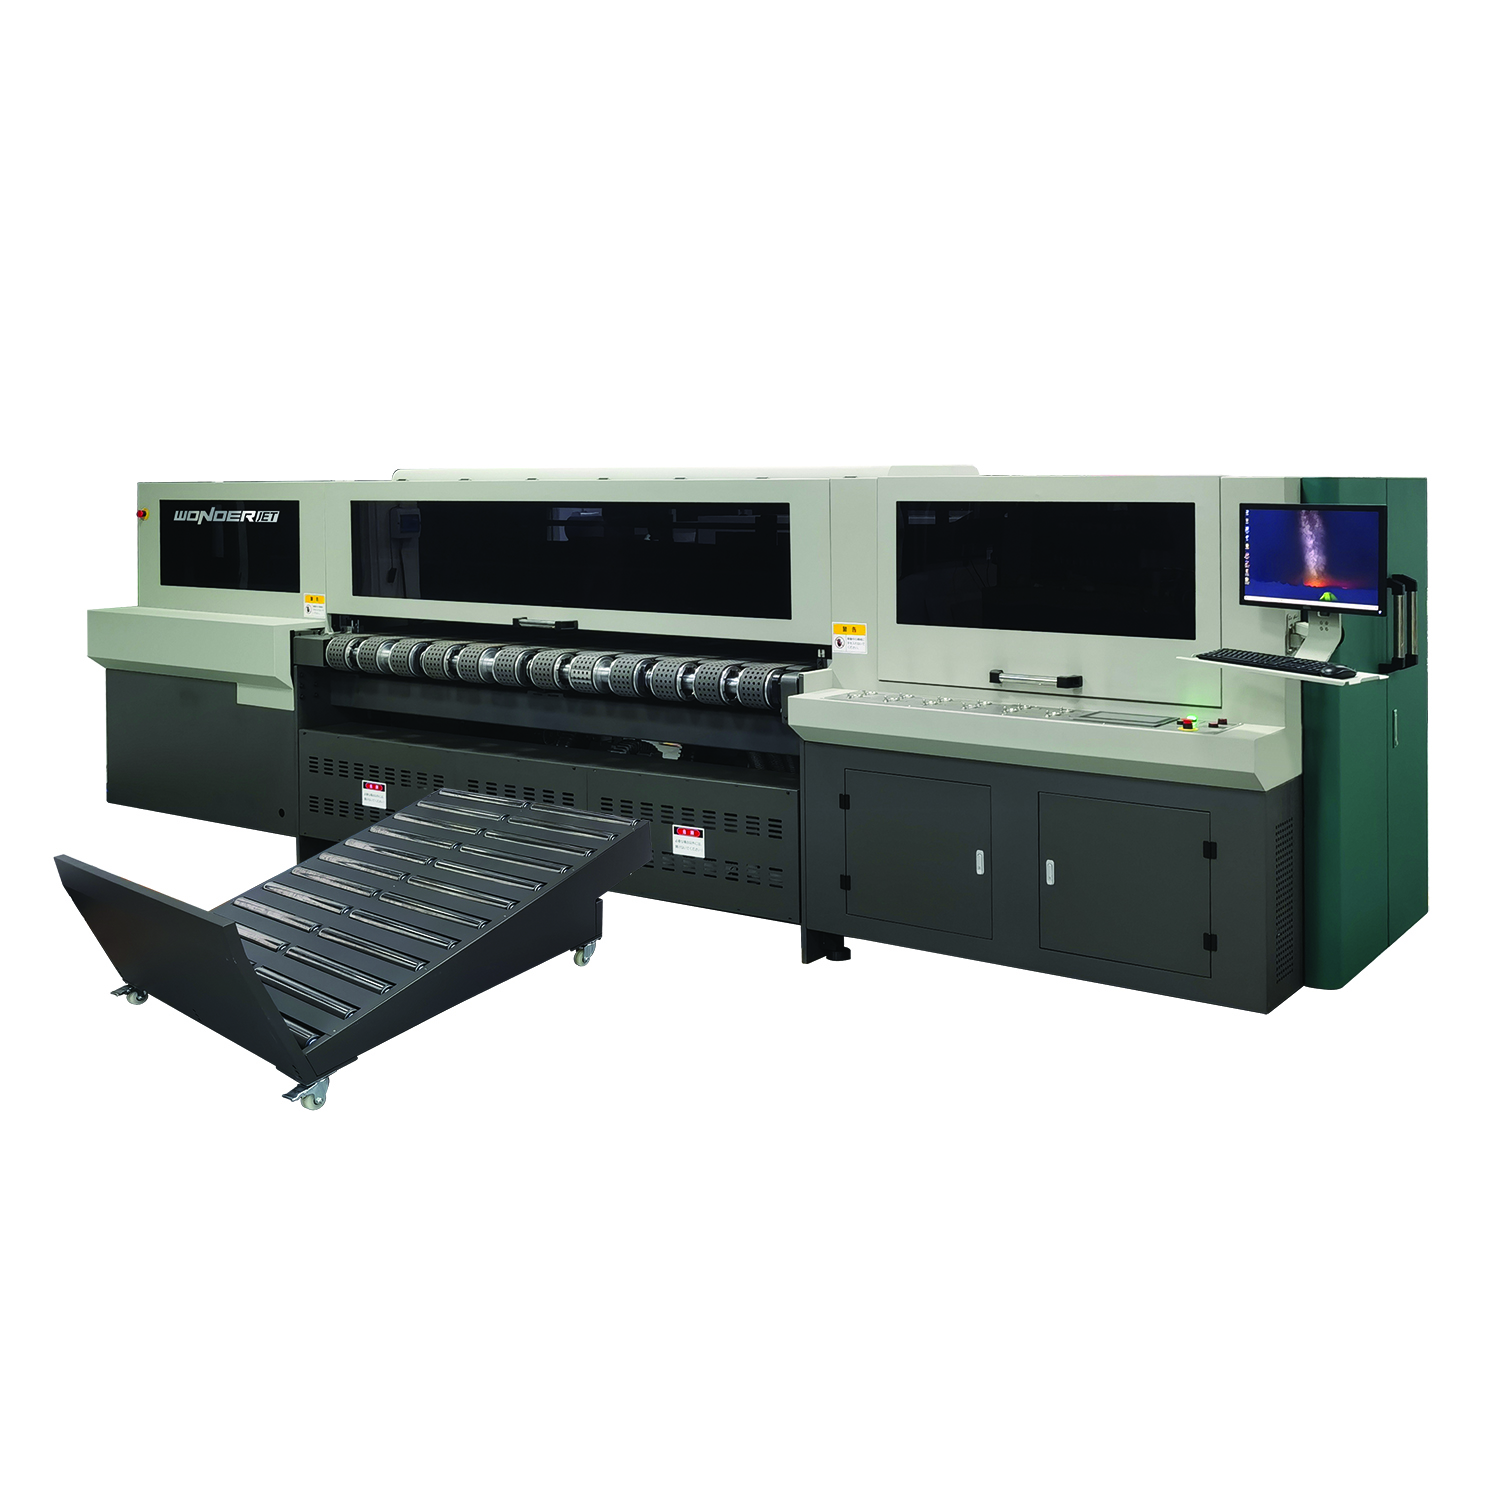 WDUV250-12A+ large format shiny color digital Printing Machine fit Small Quantity Orders with UV ink Featured Image